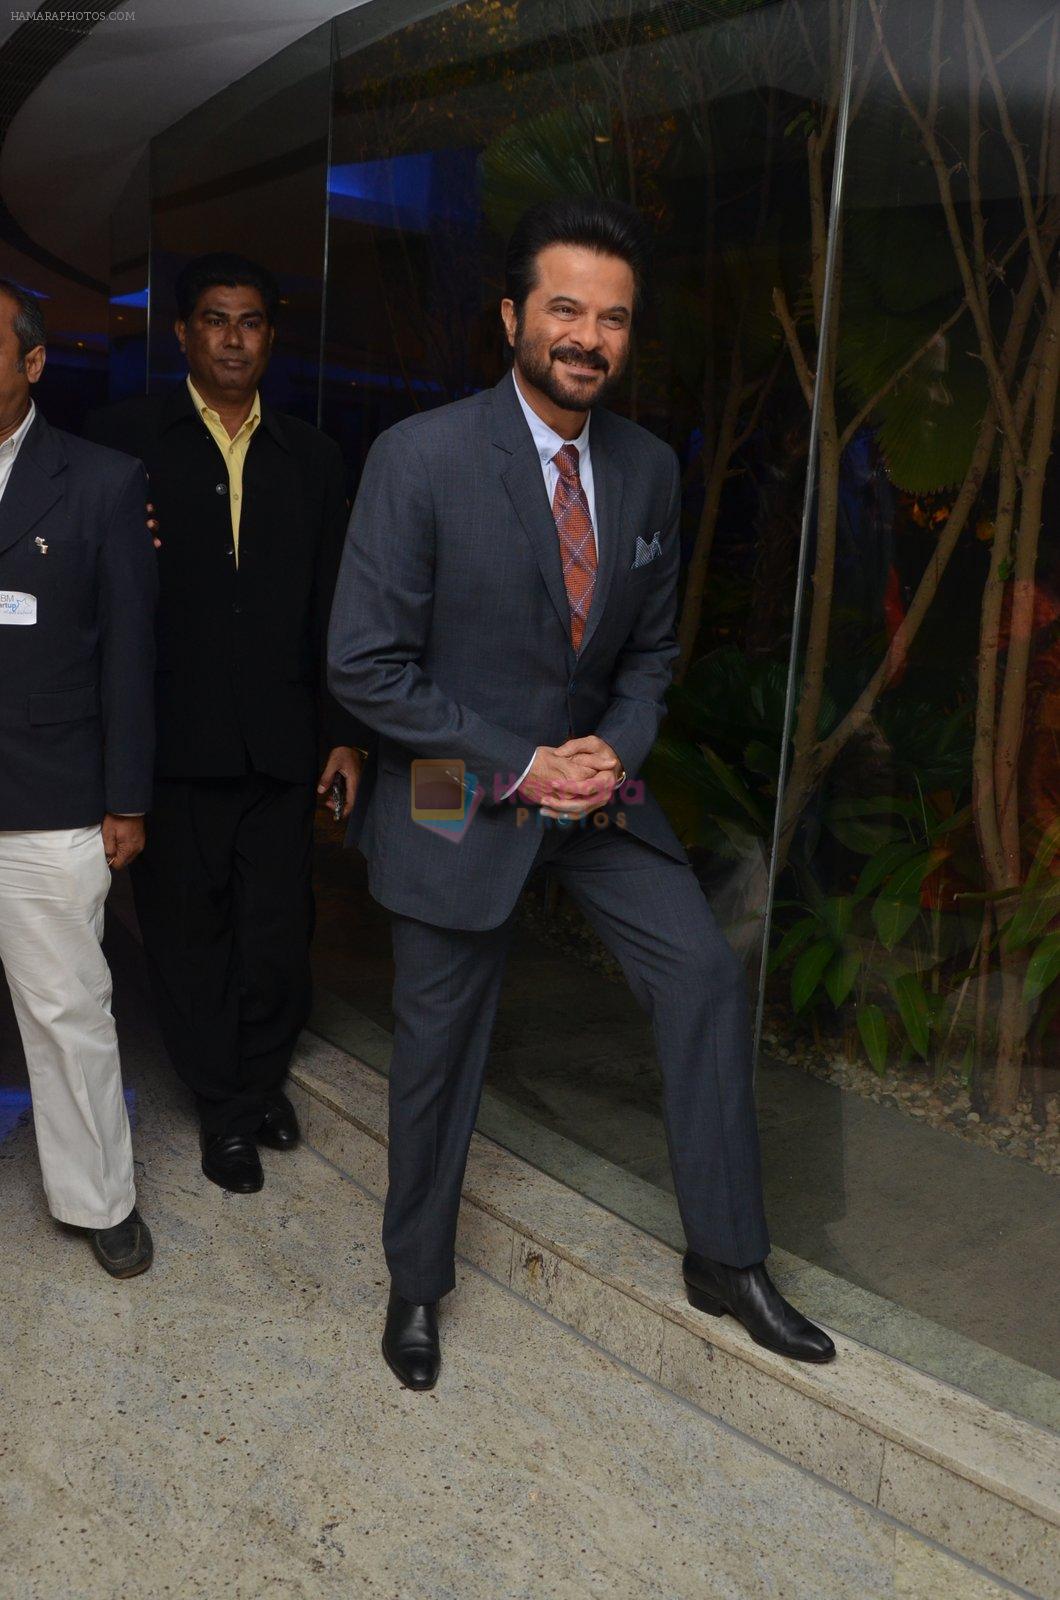 Anil Kapoor at IBM Superstar contest on 15th June 2016